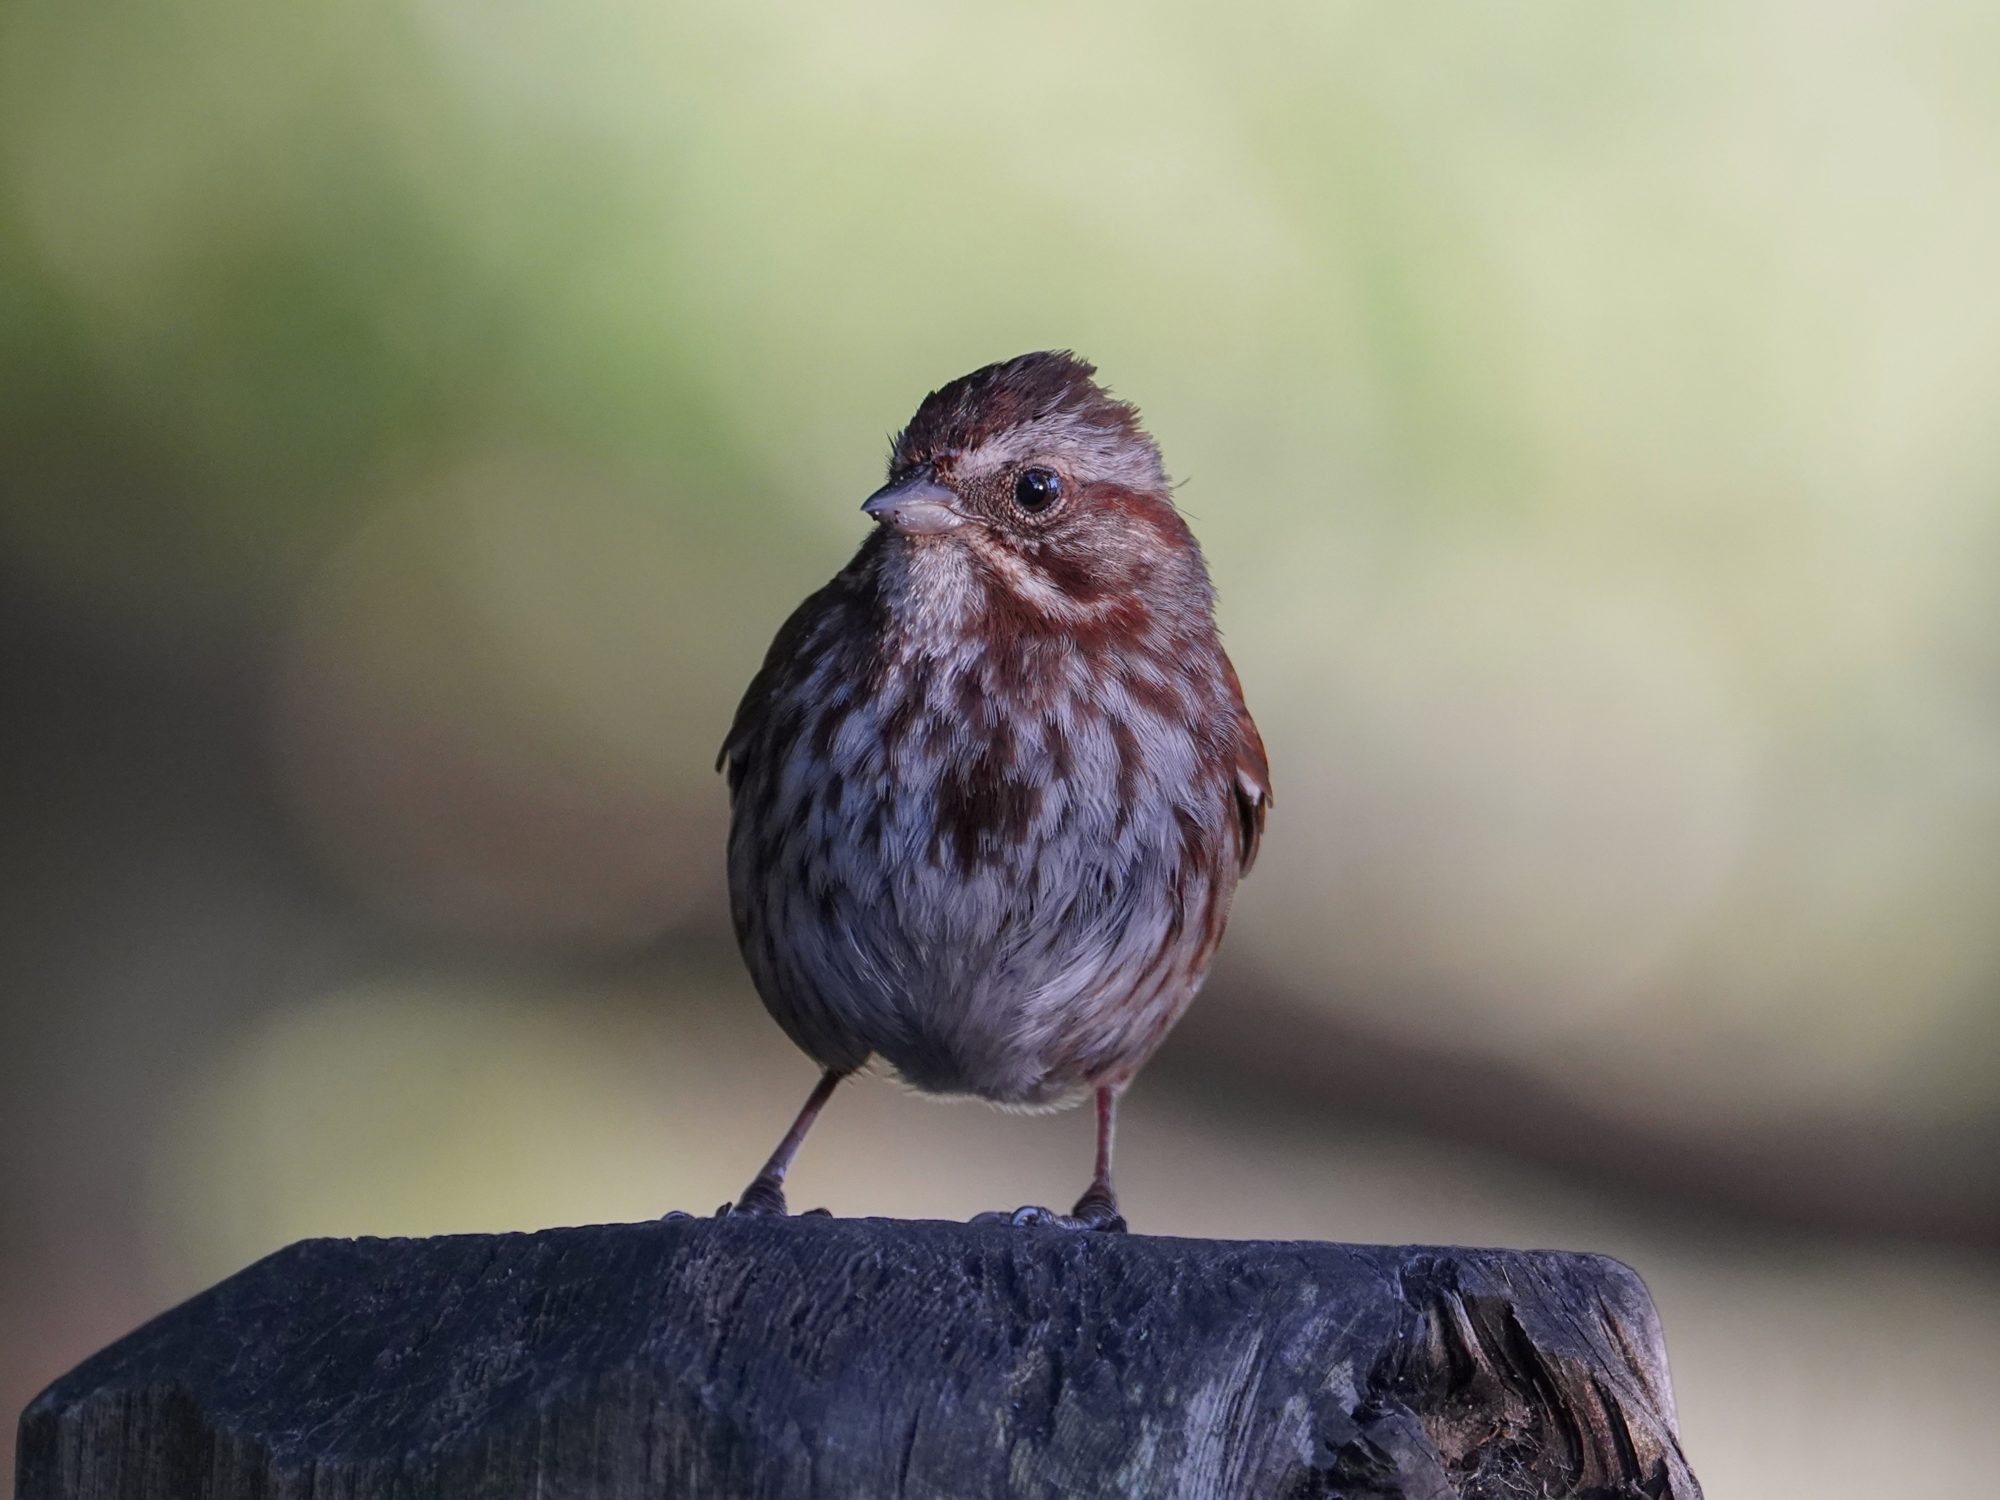 A Song Sparrow is standing on a wooden post, partly in the shade